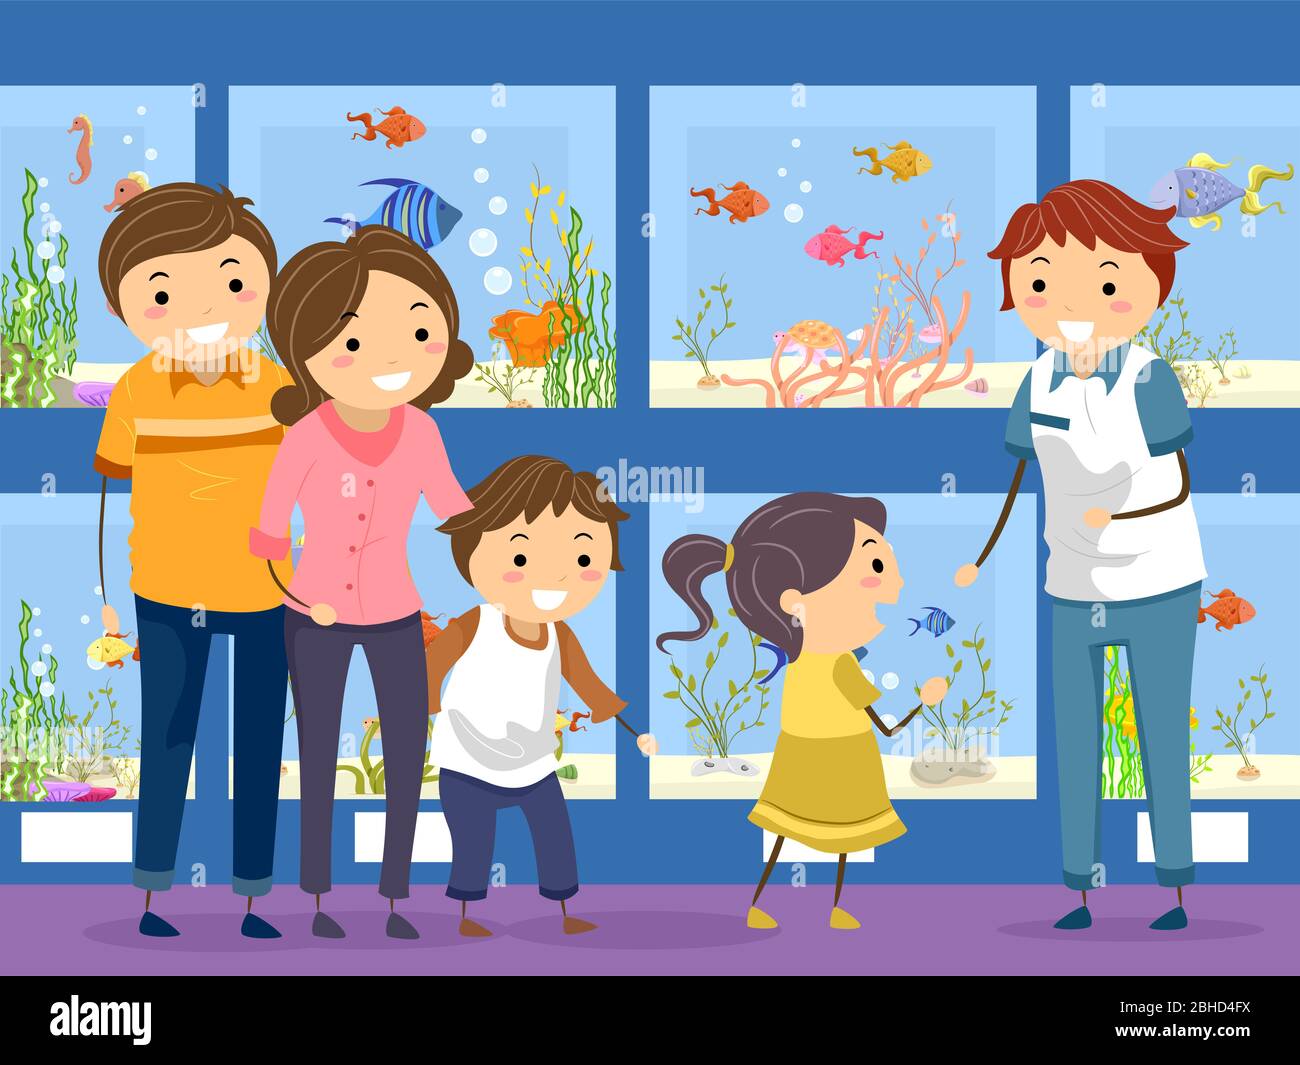 Illustration of Stickman Family Inside a Pet Shop Buying a Pet Fish Stock Photo